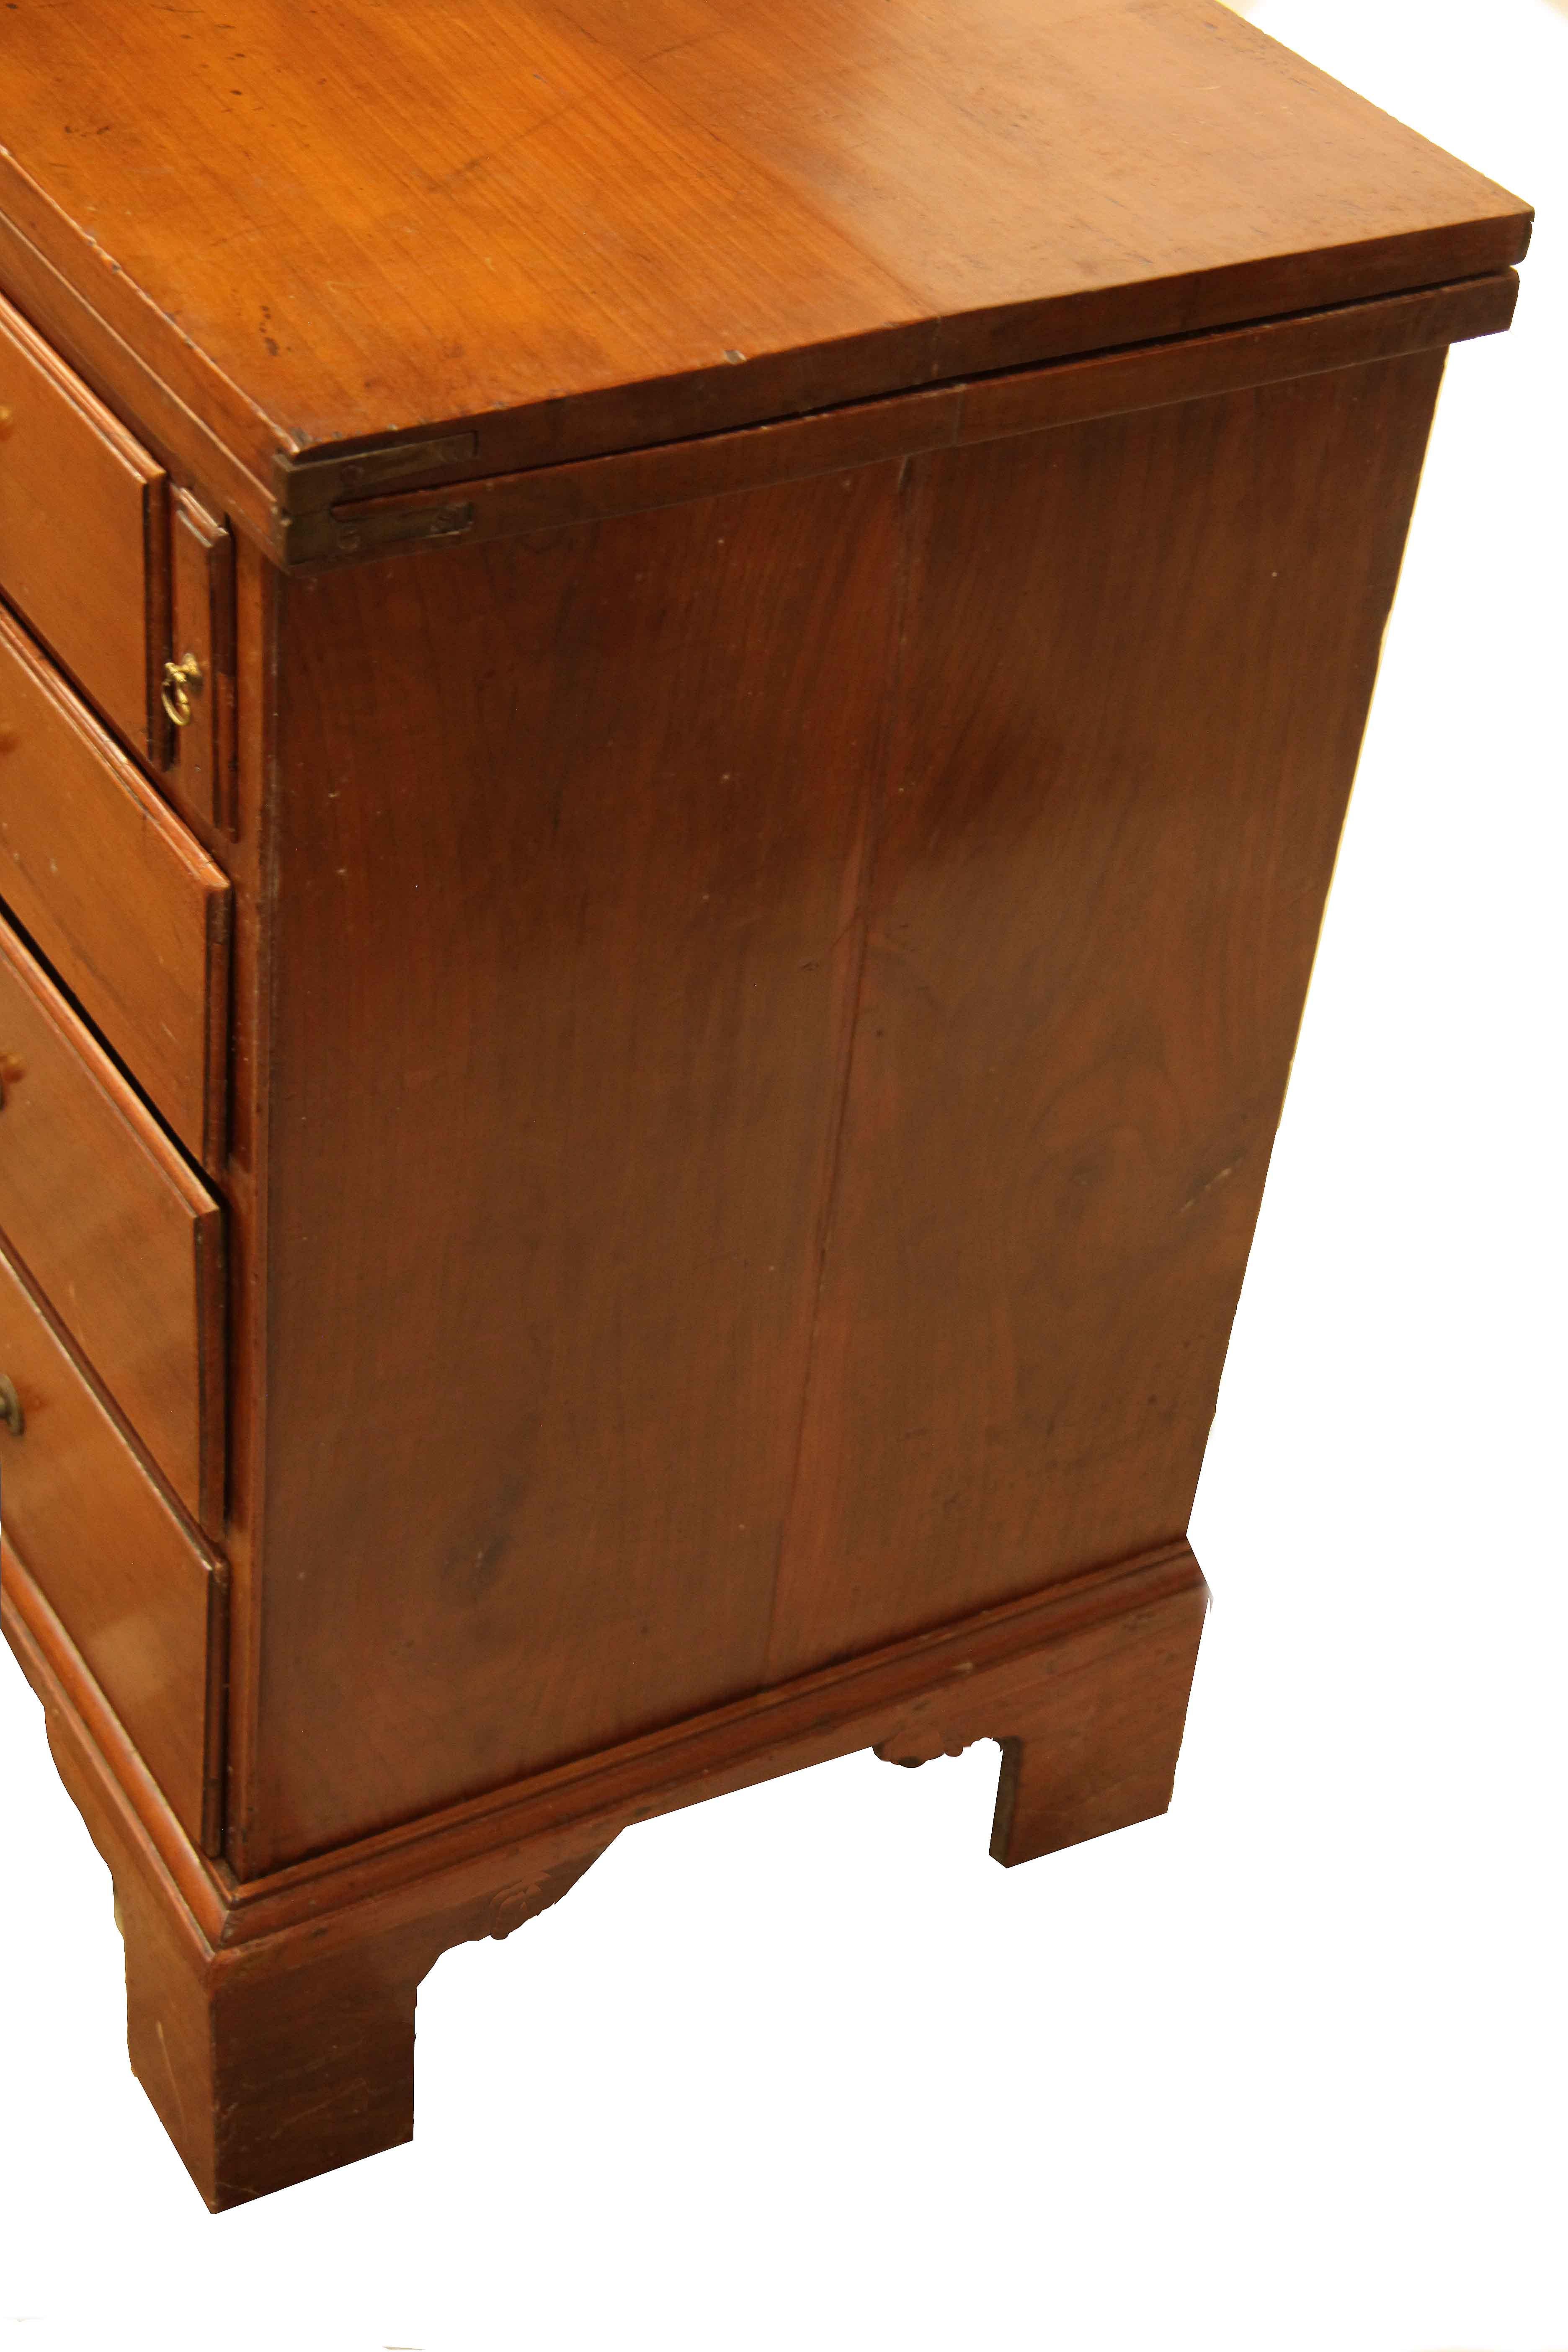 English Fruit Wood Fold over Top Chest  In Good Condition For Sale In Wilson, NC